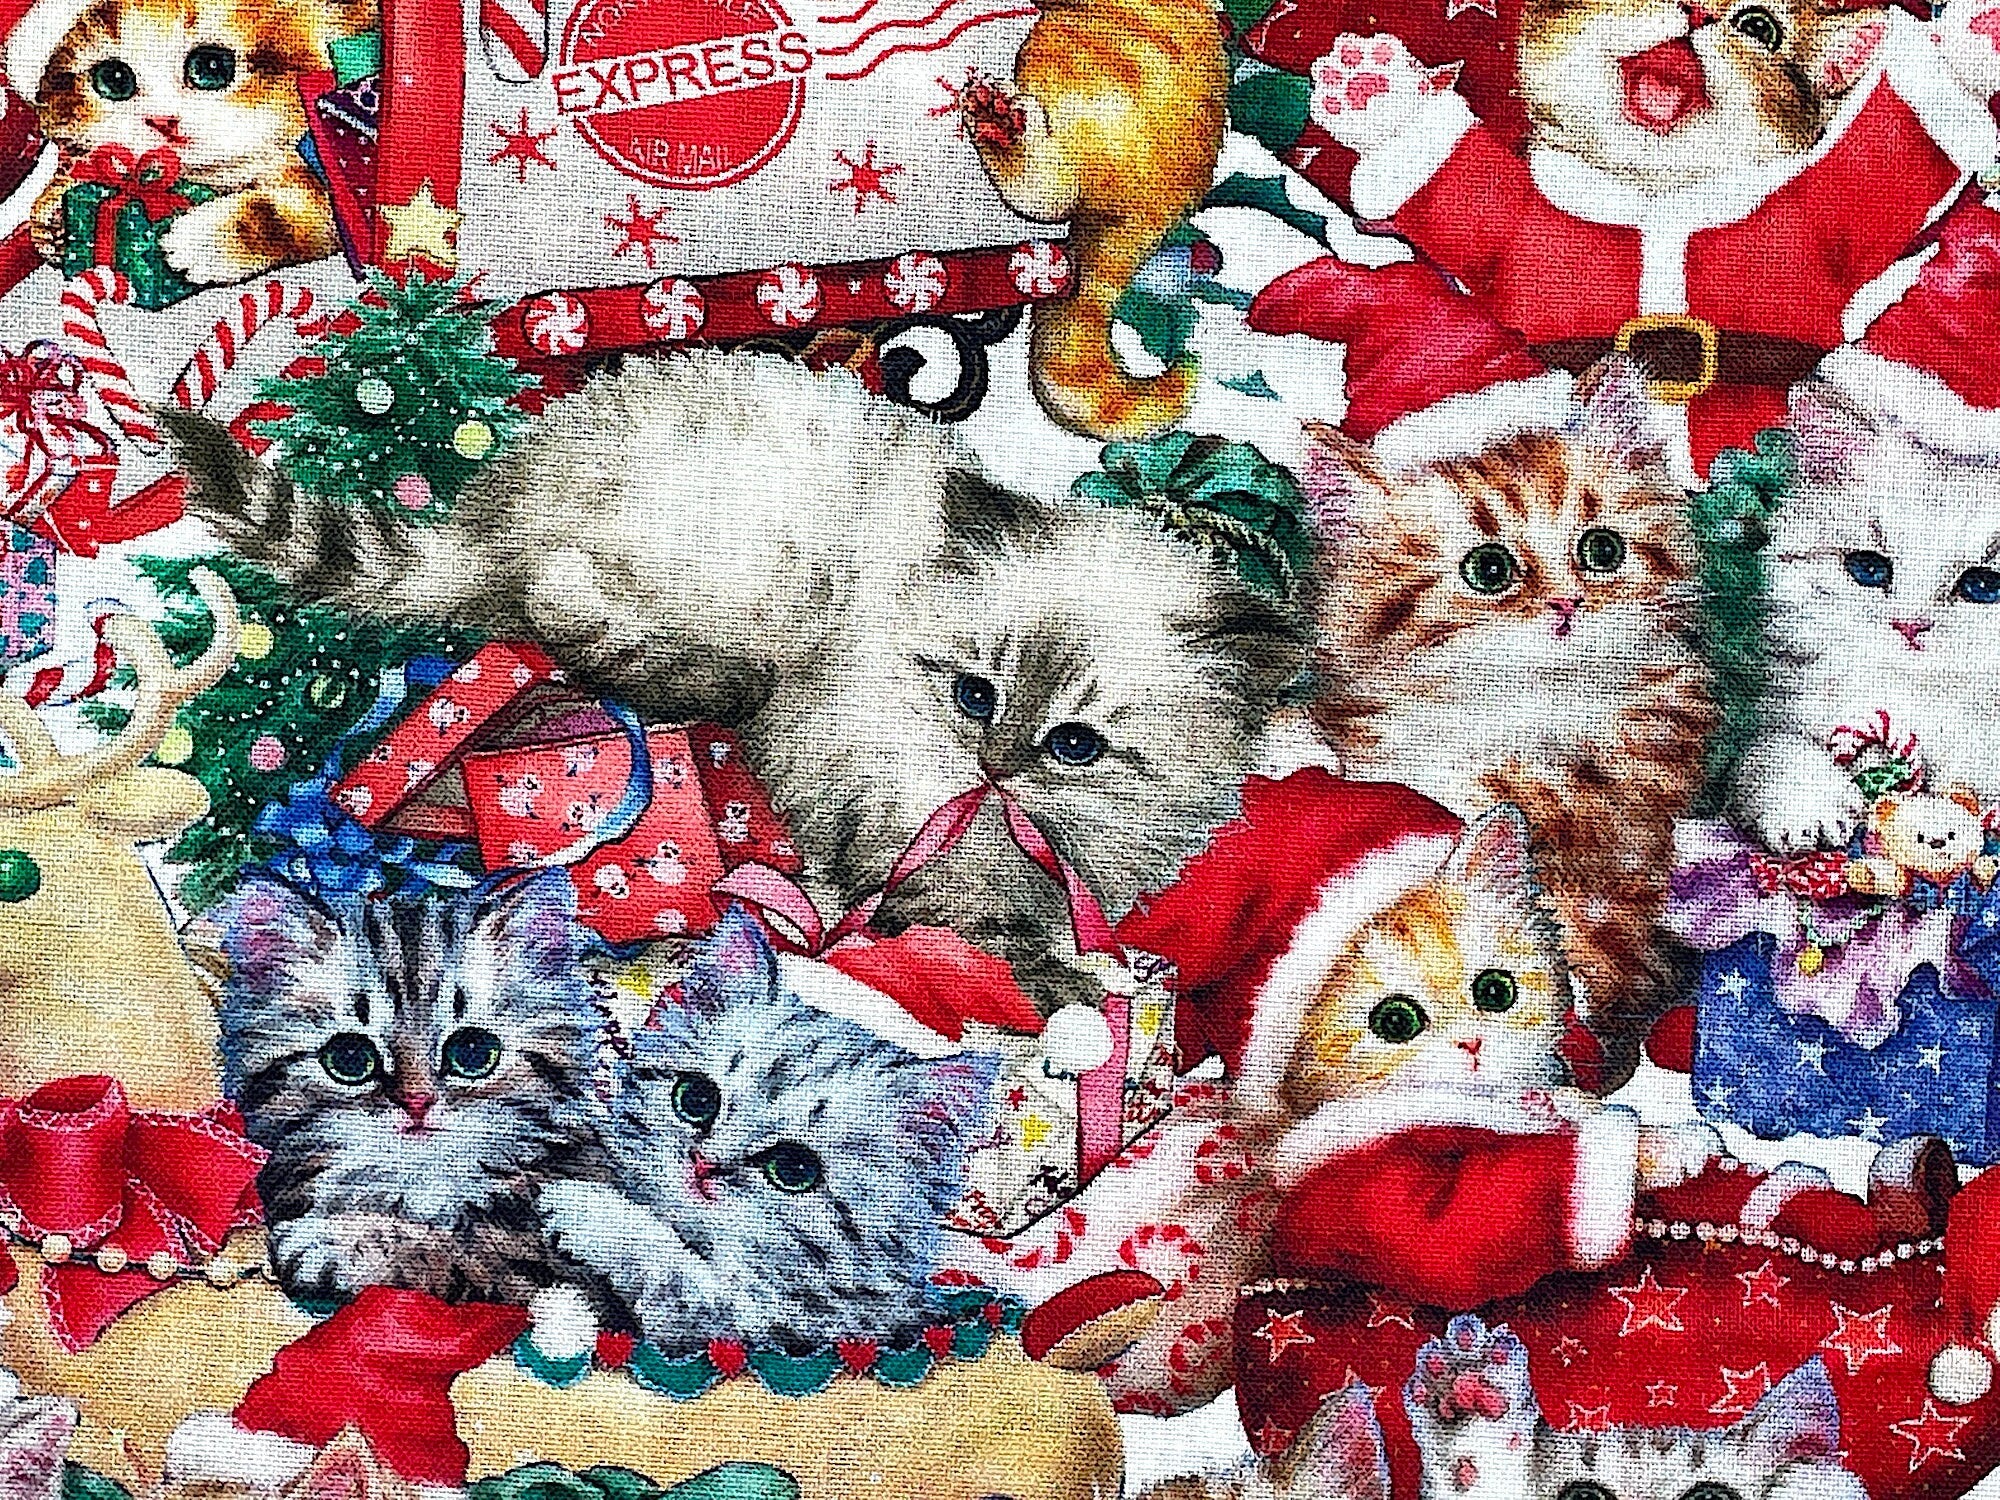 Close up of kittens in red suits.